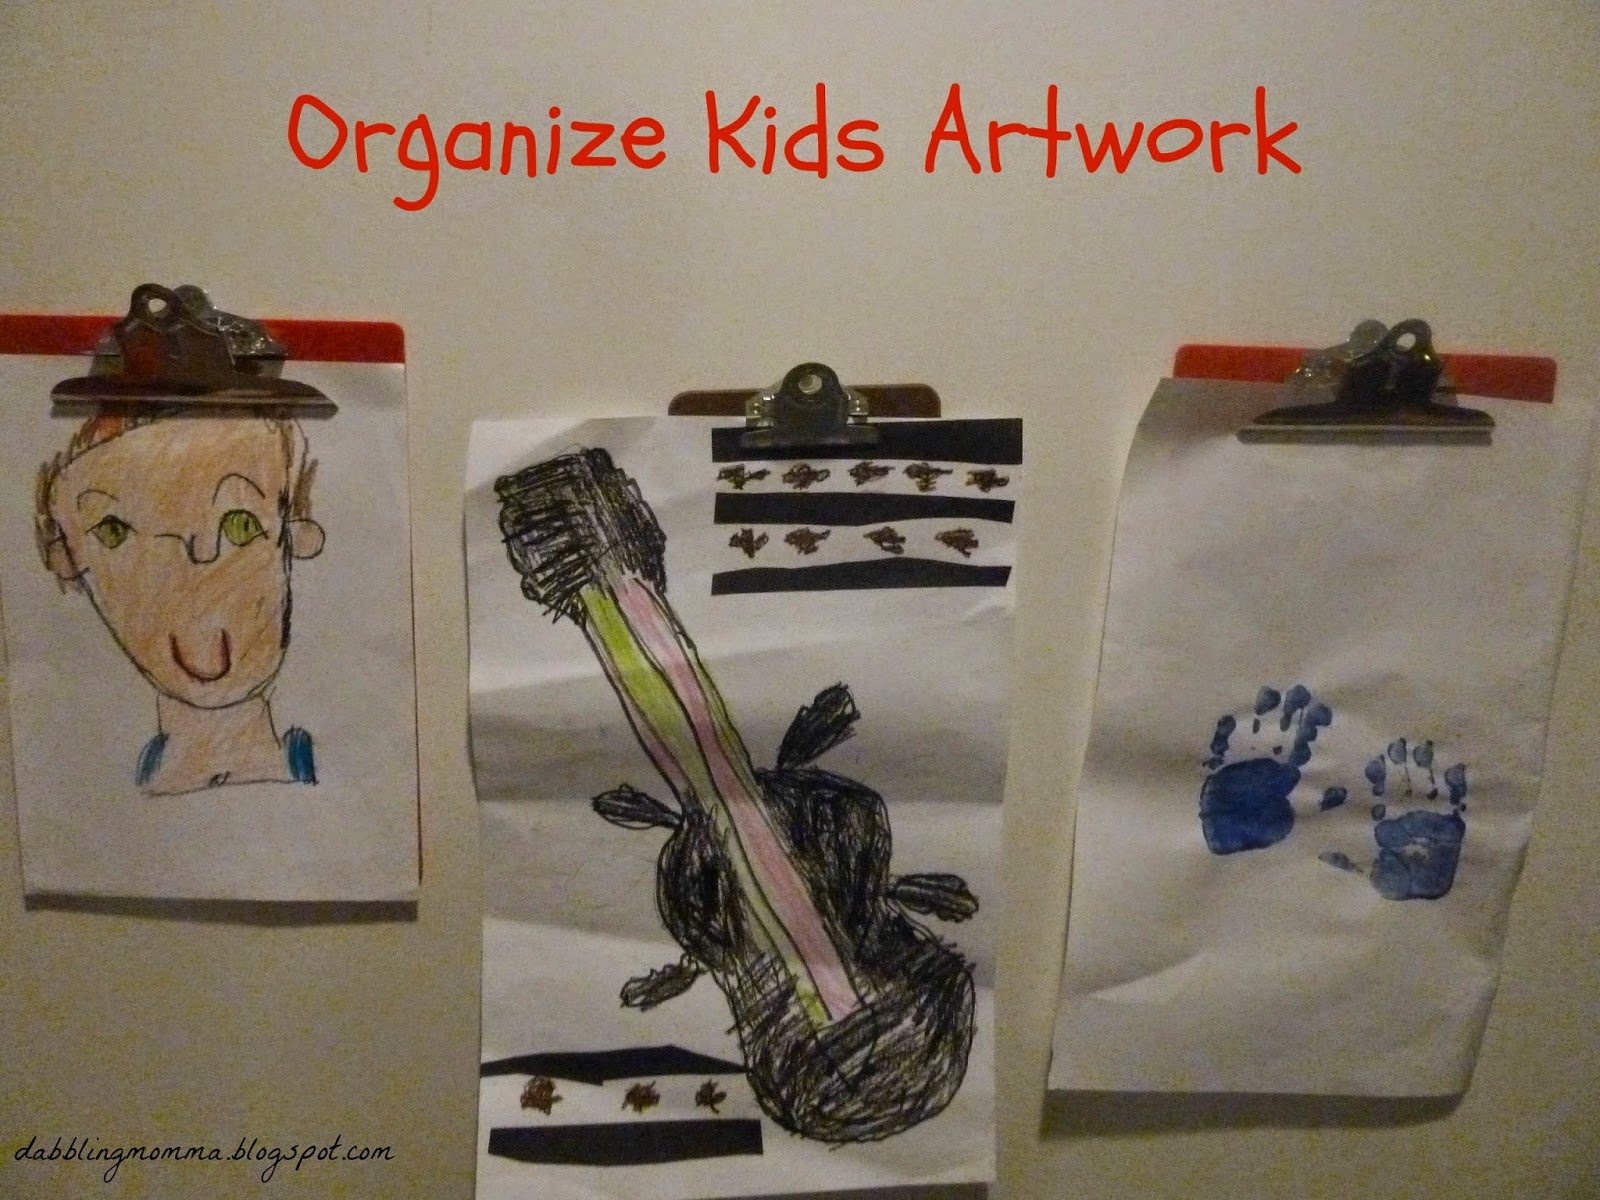 Organizing Schoolwork at Home - How to Organize Your Childrens' Art